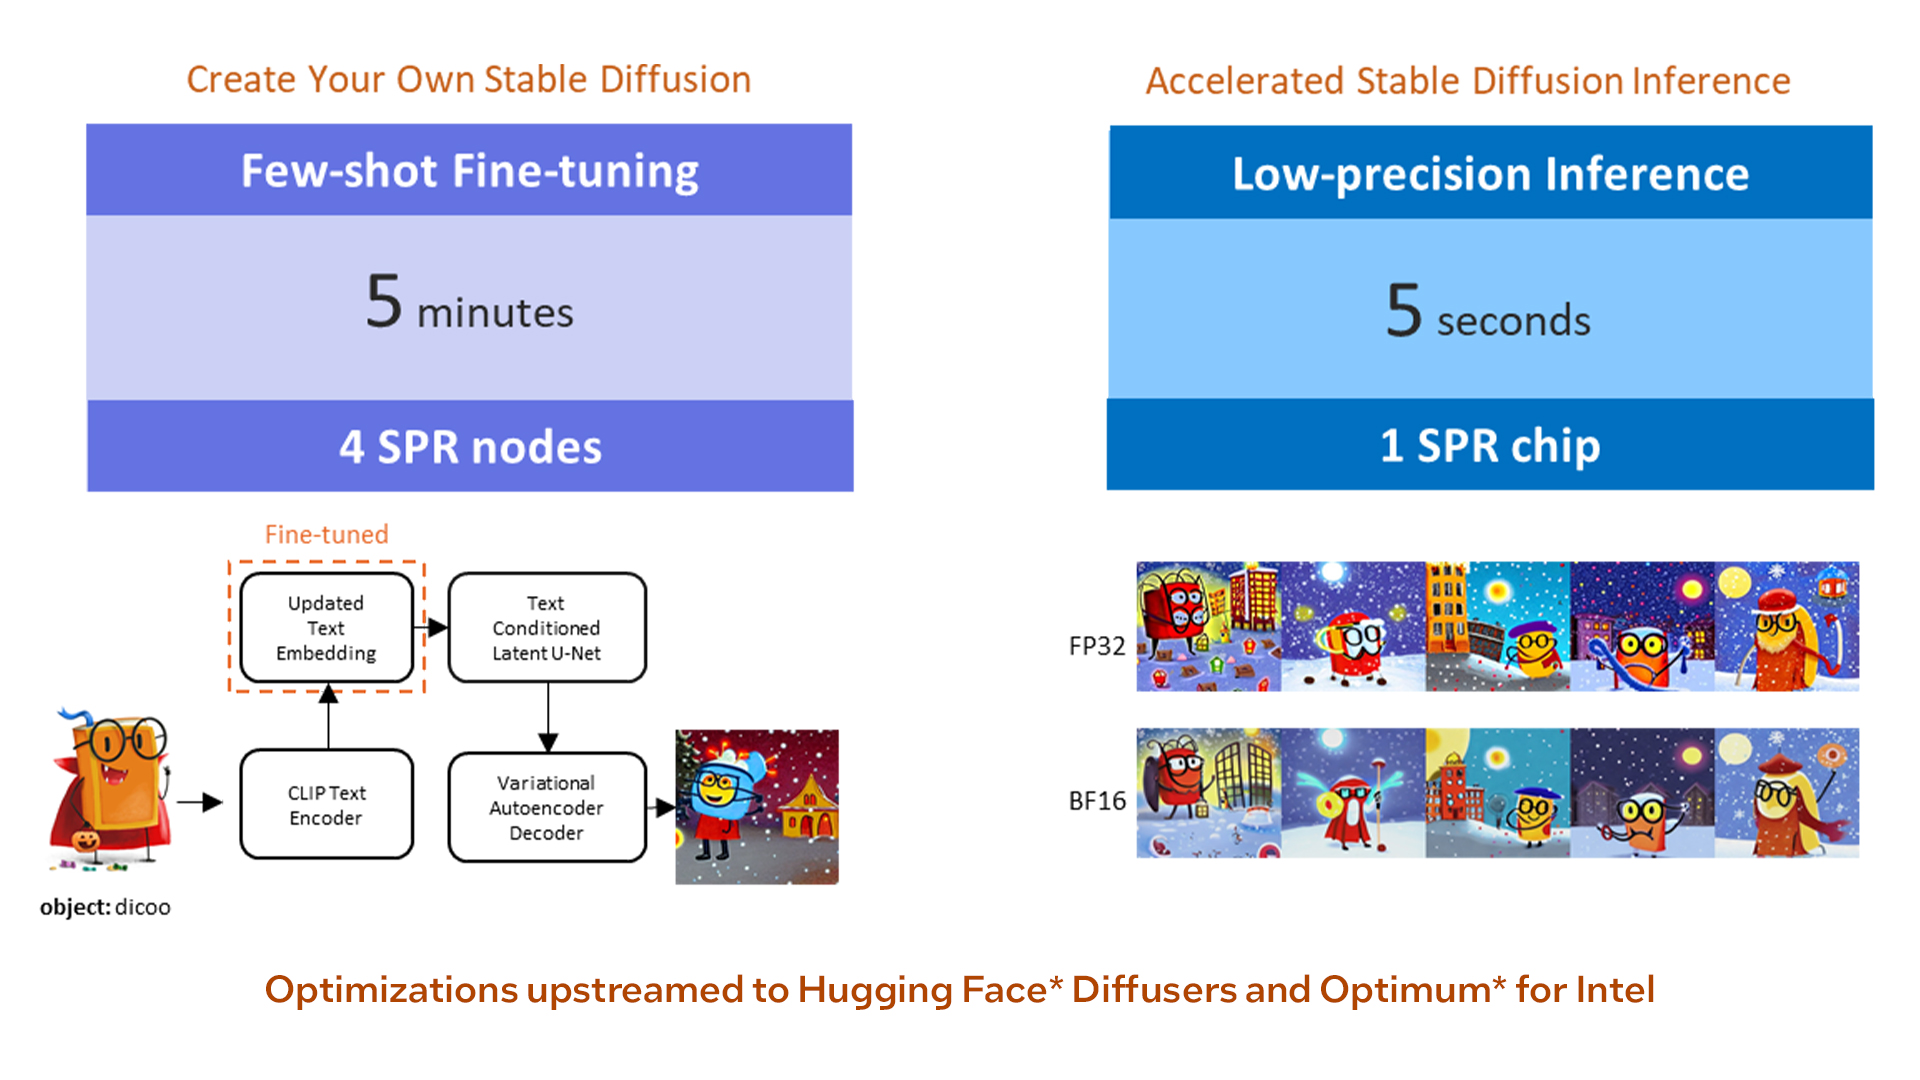 comparison of a personalized stable diffusion to accelerated stable diffusion inference